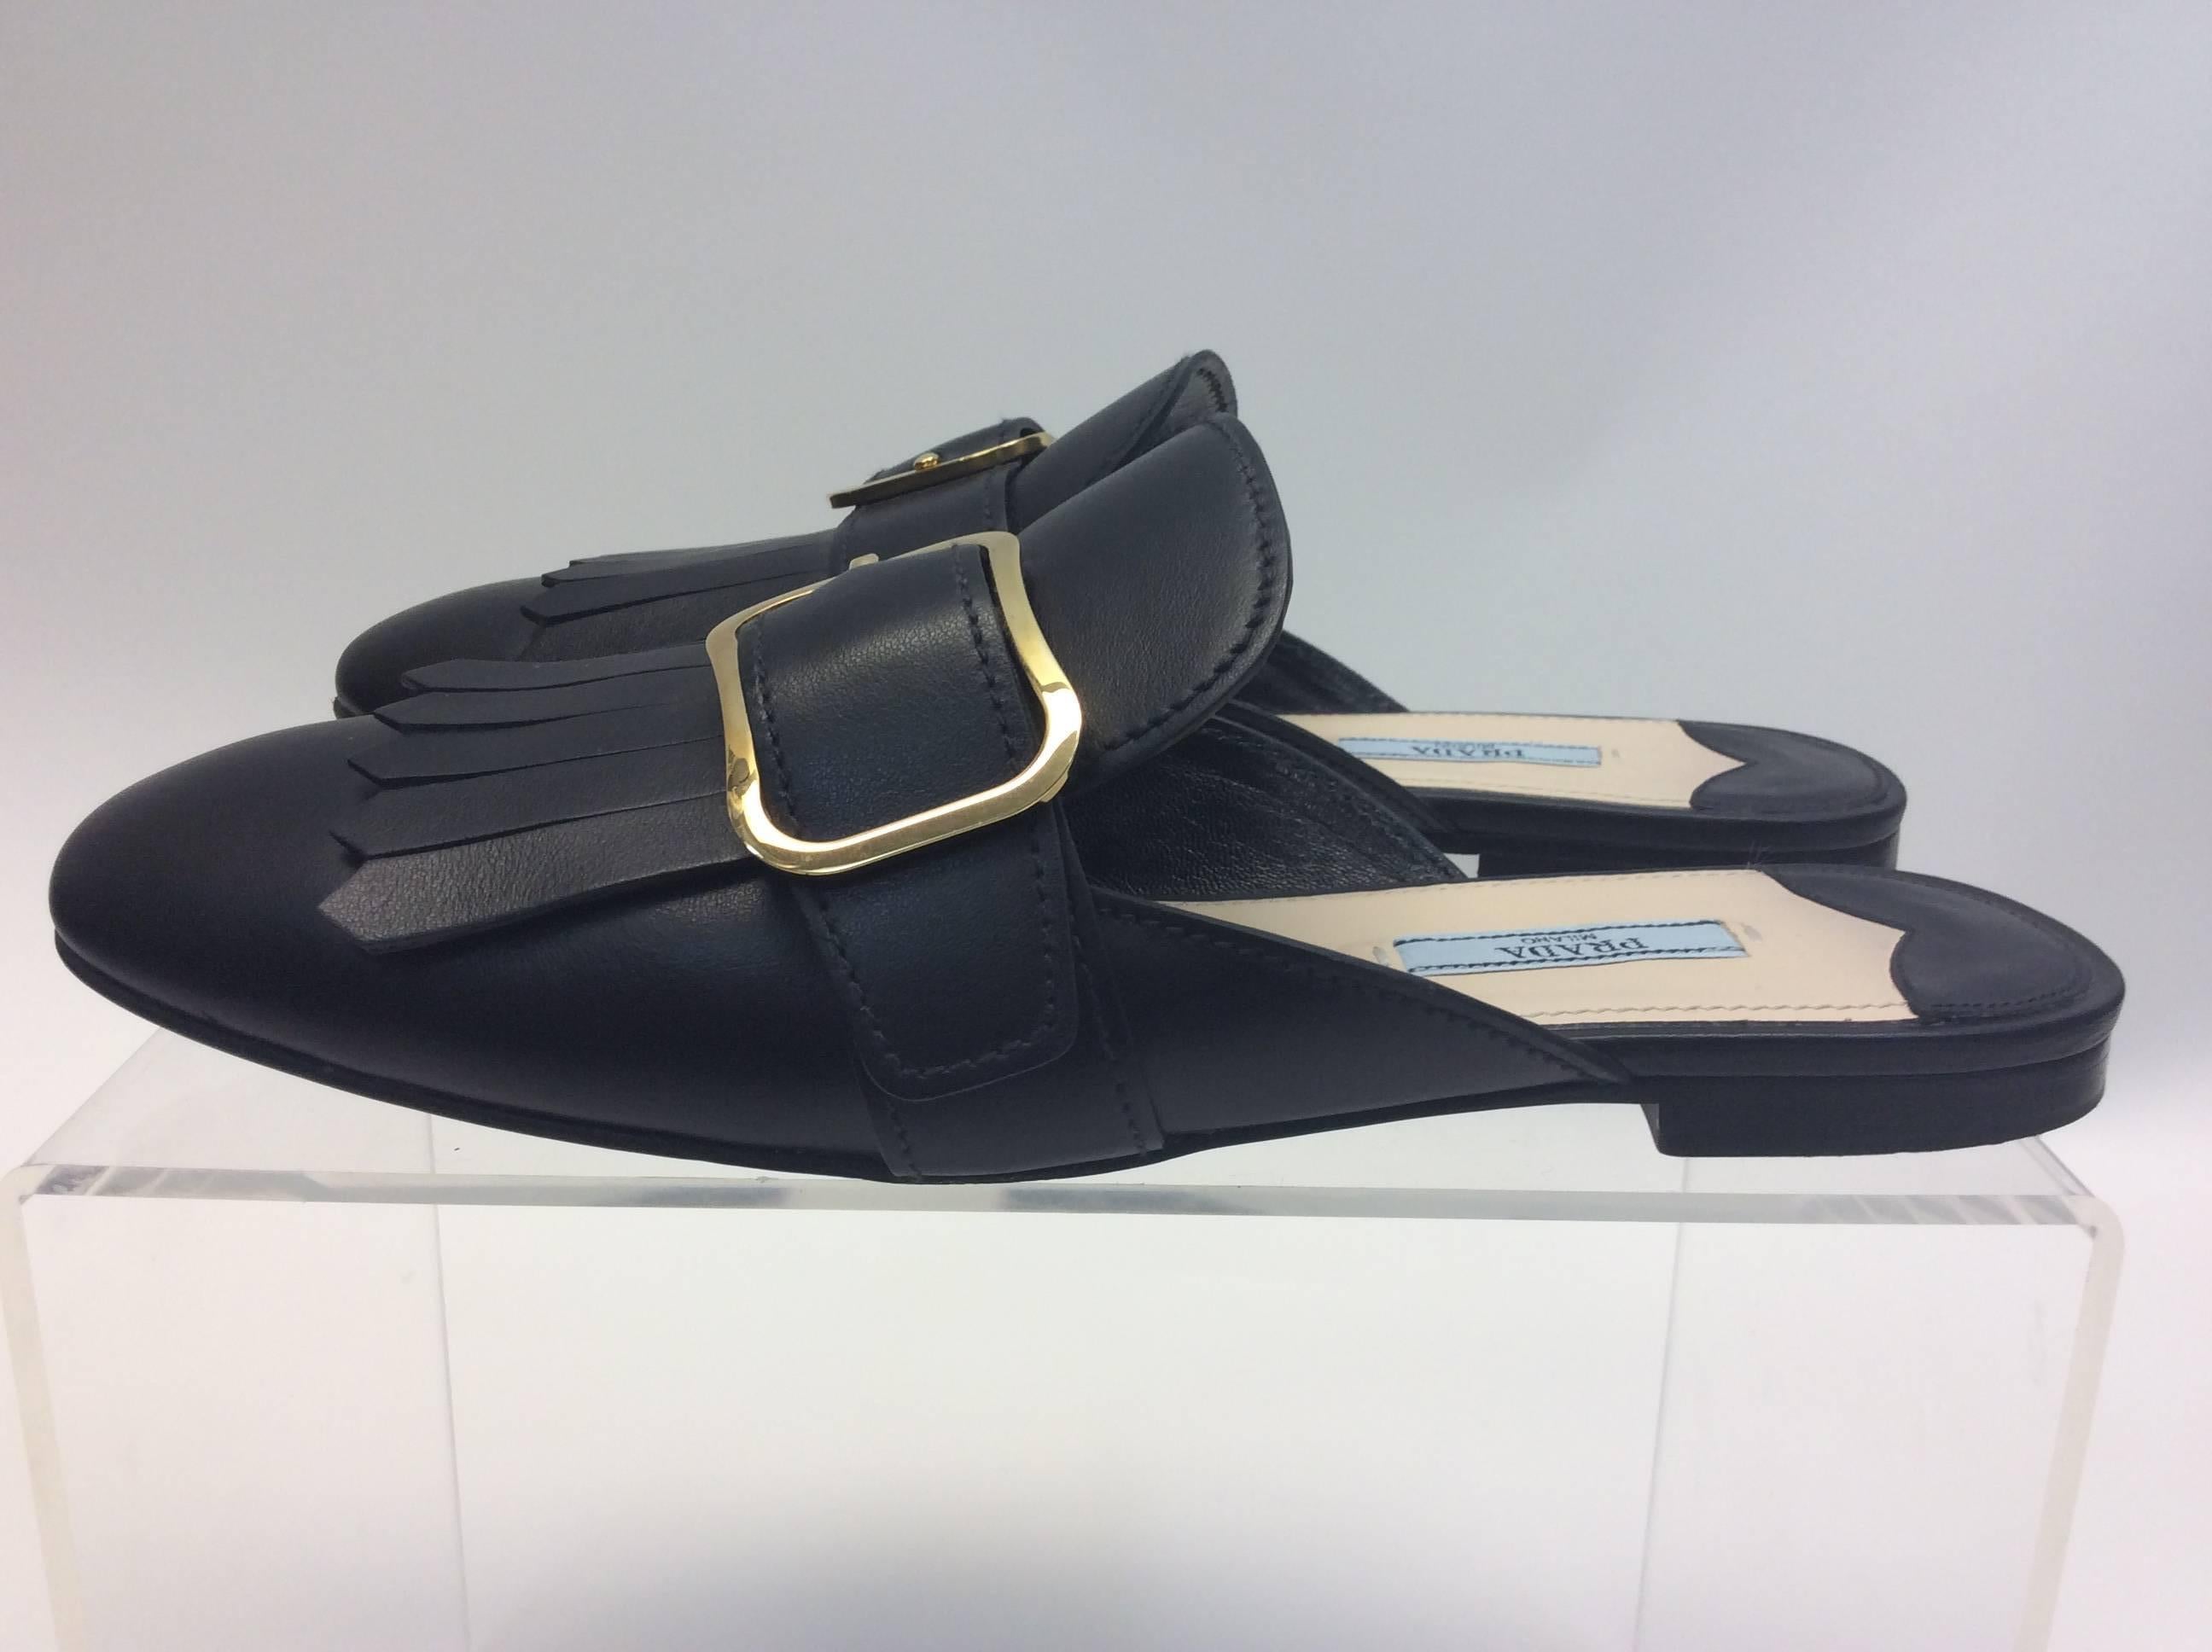 Prada Black Leather Fringe Slide with Buckle
$450
Made in Italy
Leather
Size 39
